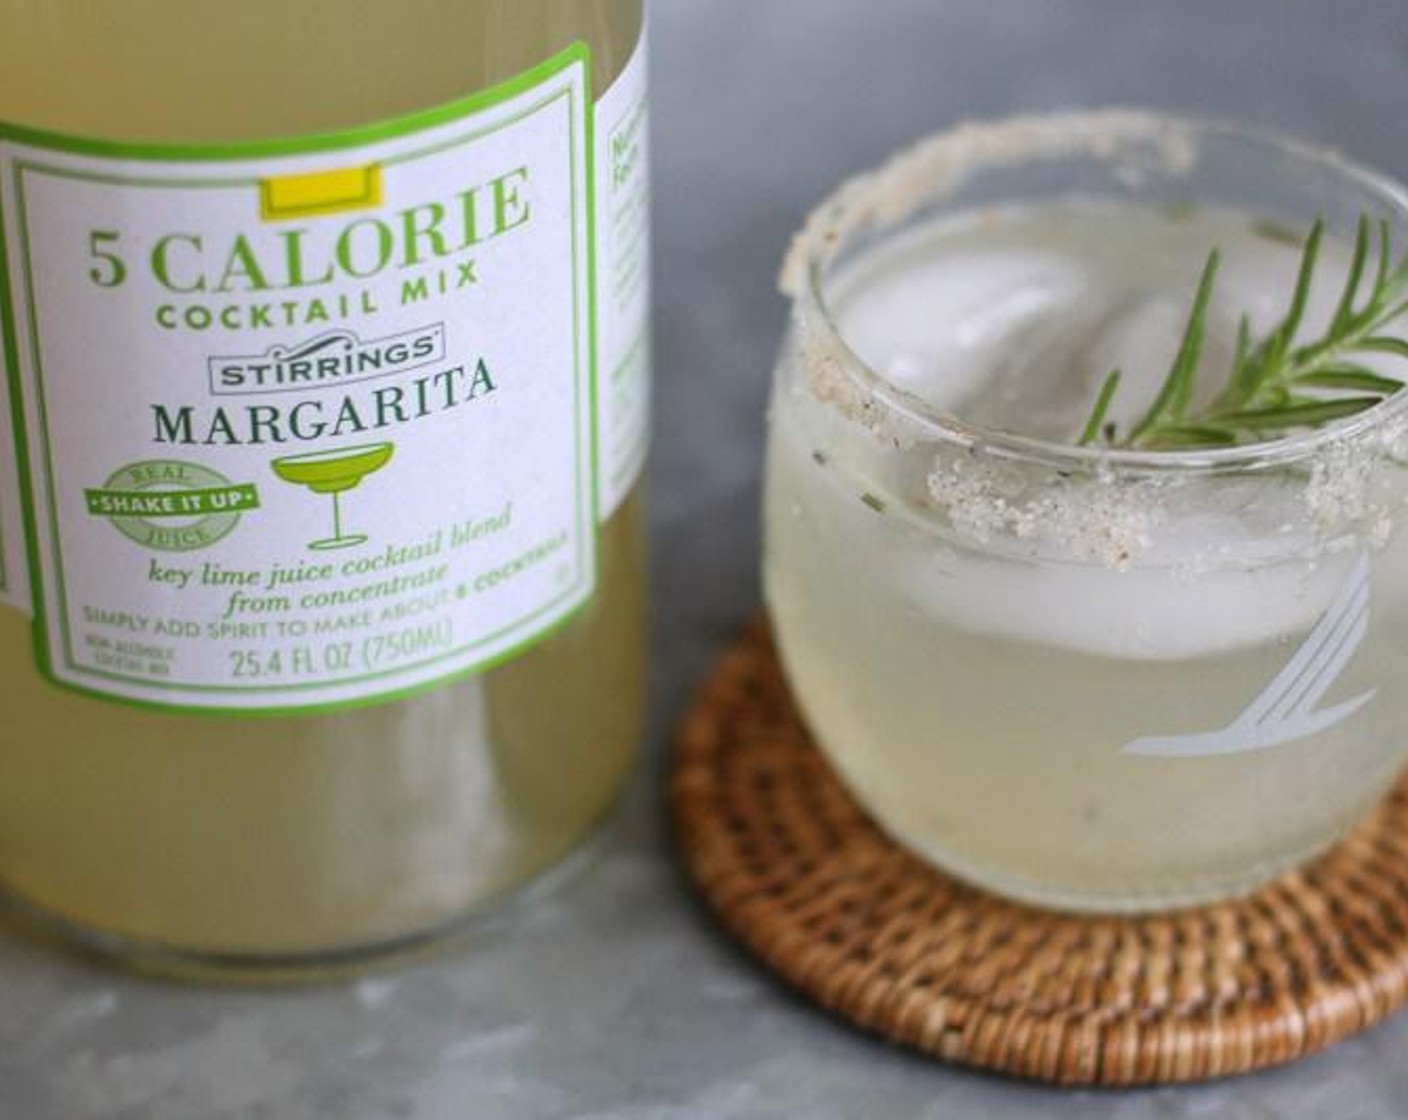 Skinny Citrus Rosemary Margarita with Jalapeno Infused Tequila